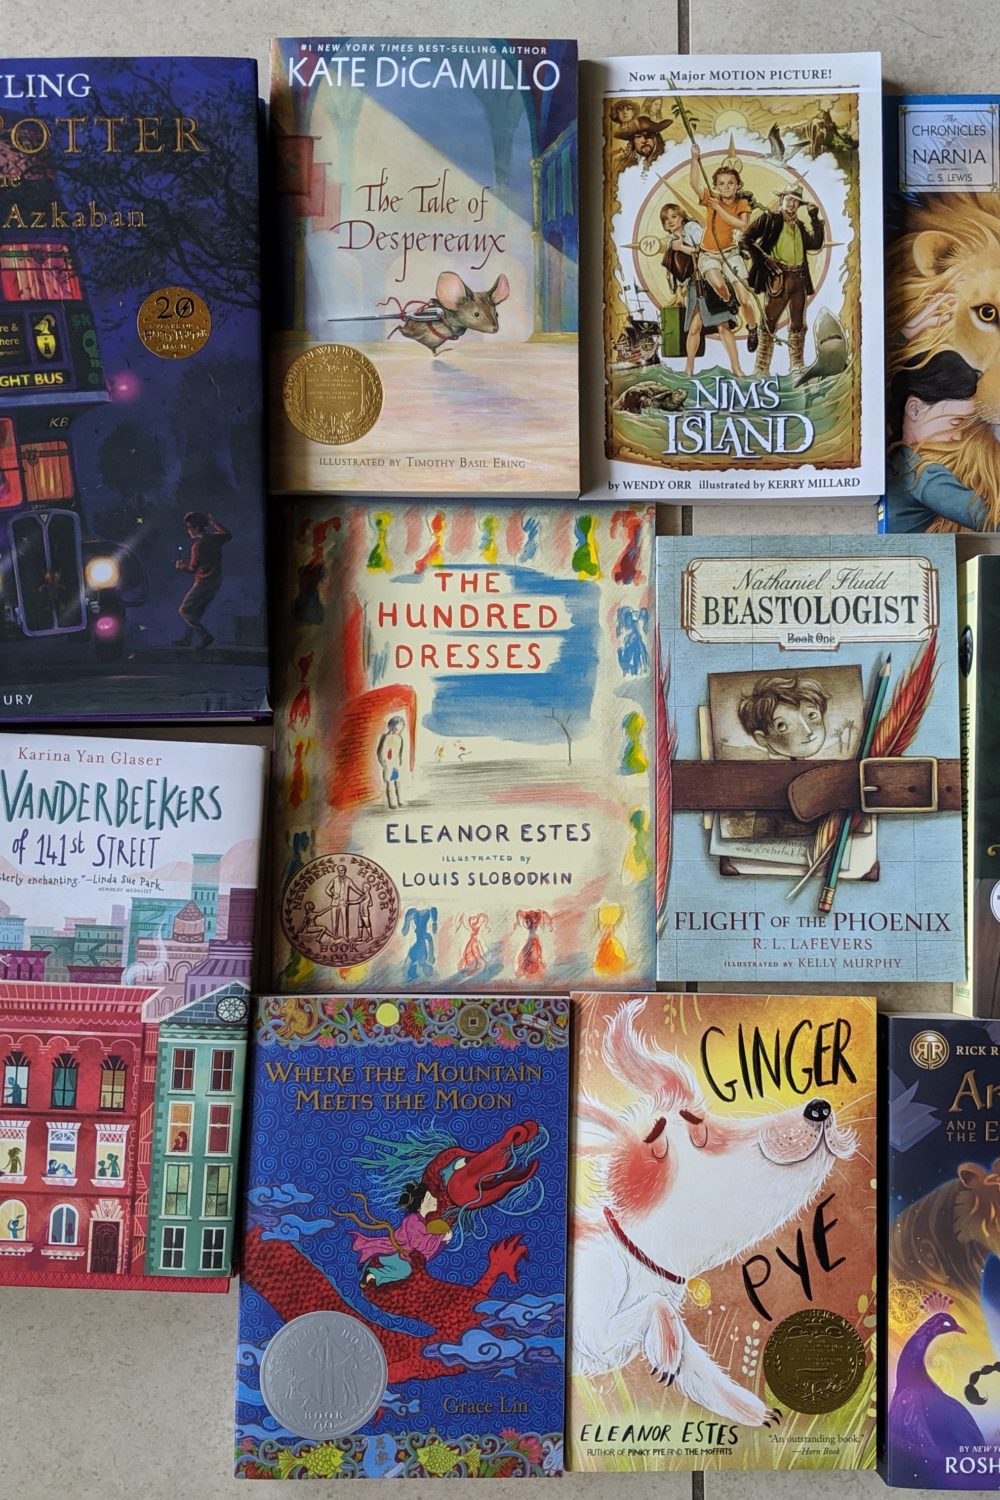 Fantastic read alouds for grade 2 and 4